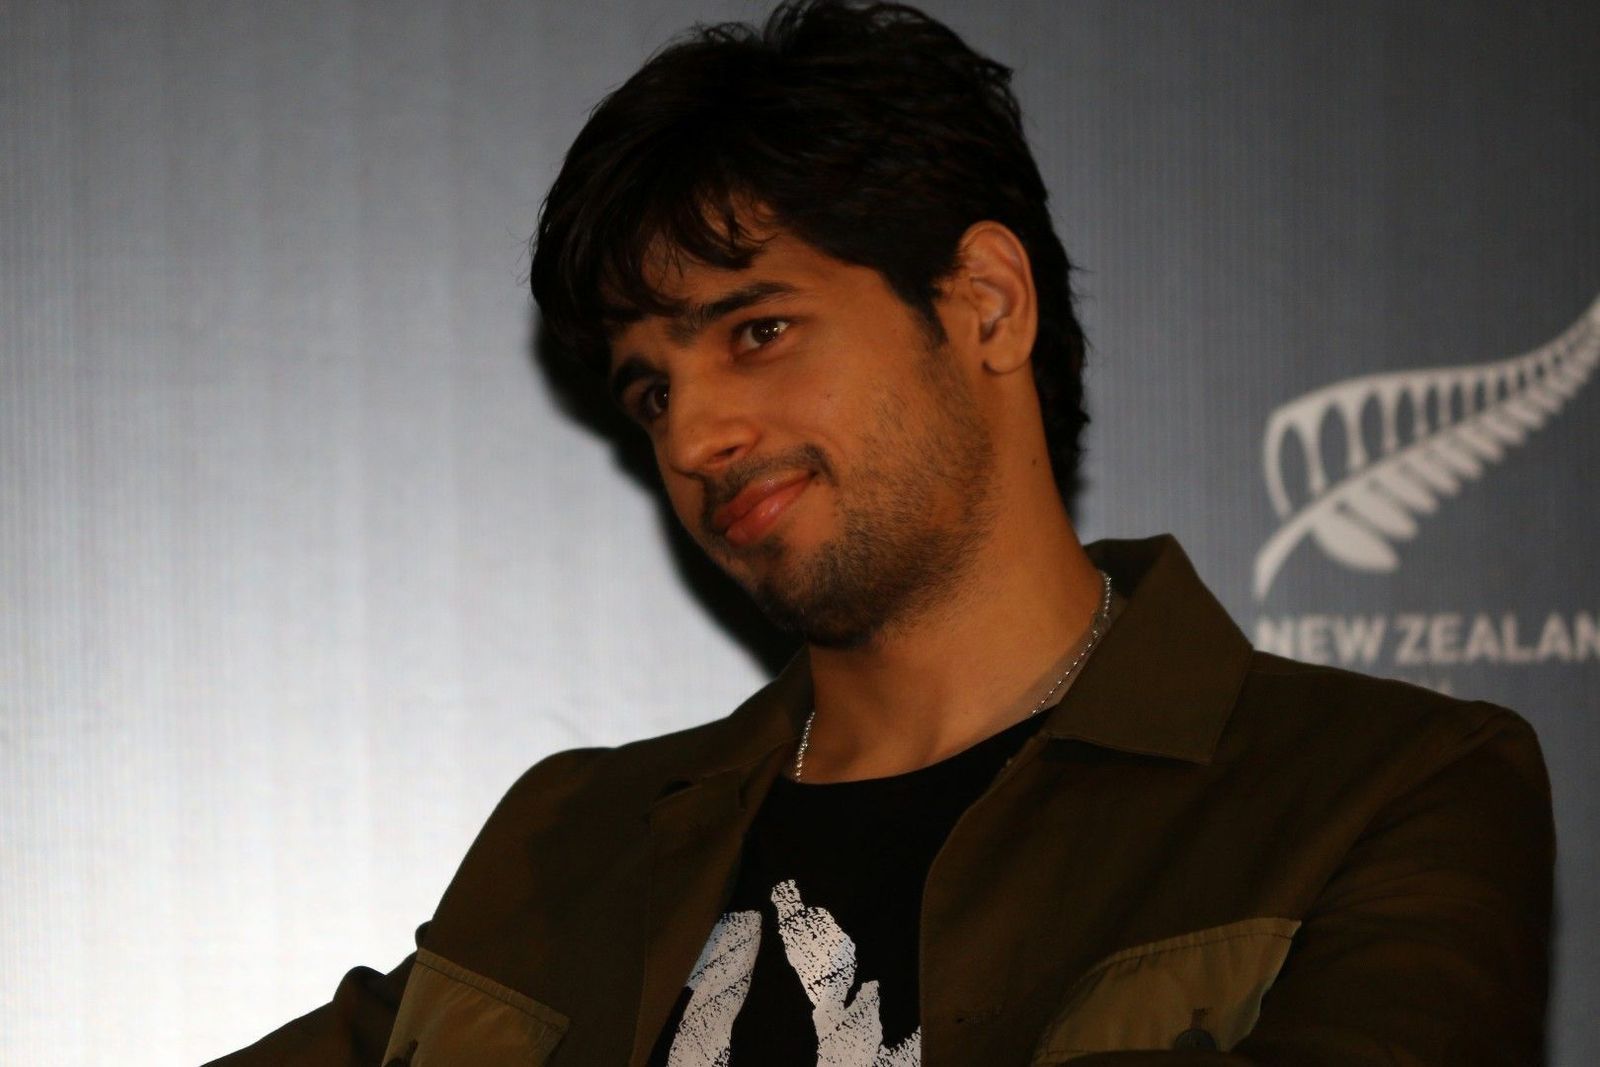 Press Conference With Sidharth Malhotra As Brand Ambassador For Tourism New Zealand Photos | Picture 1465288